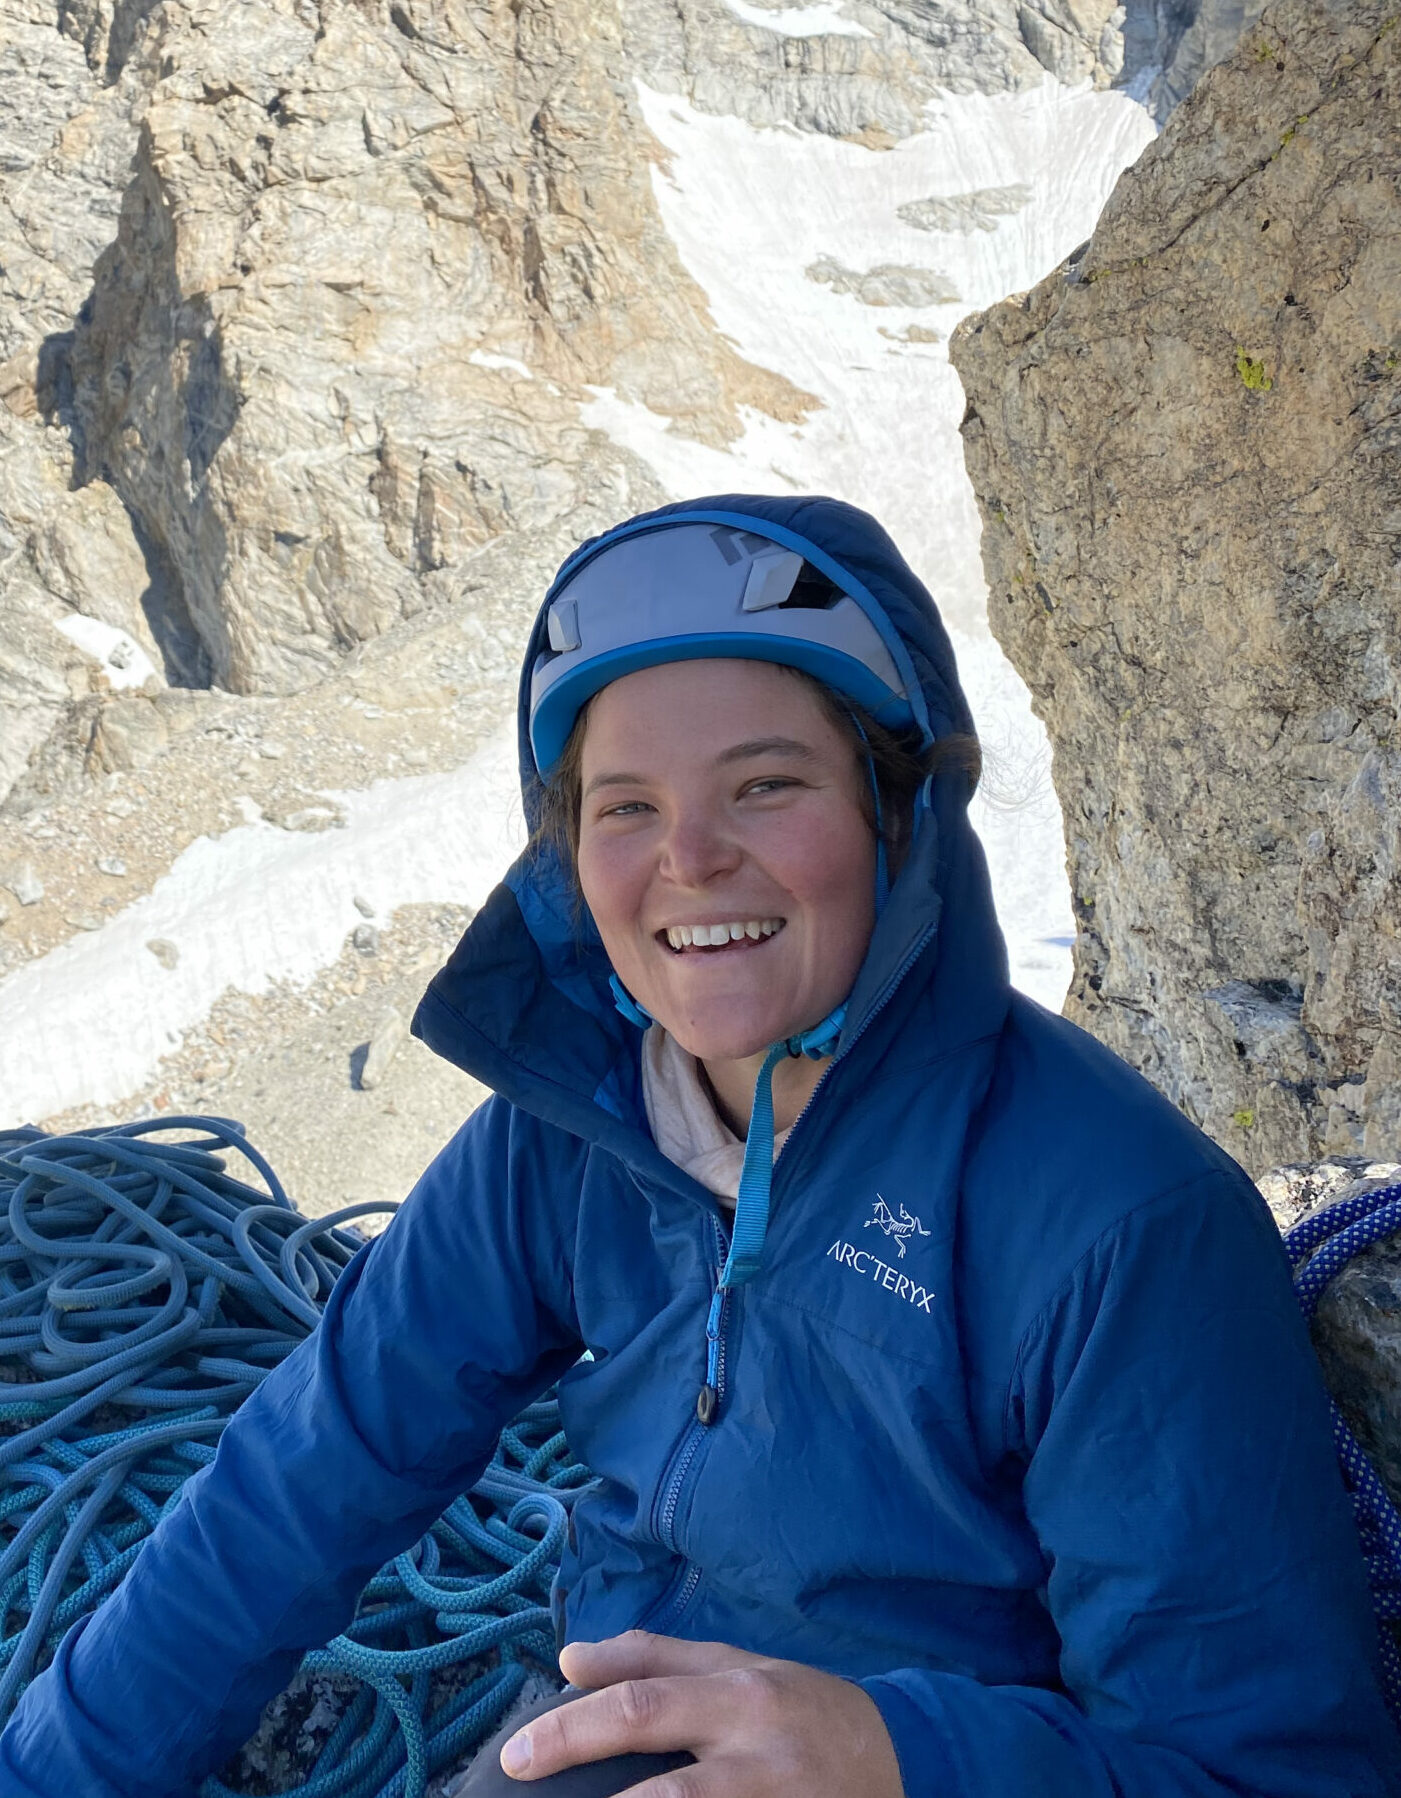 Cairn Project Ambassador Leah Genth smiles on a multipitch climb with rope coiled beside her and a snowy mountainside behind her